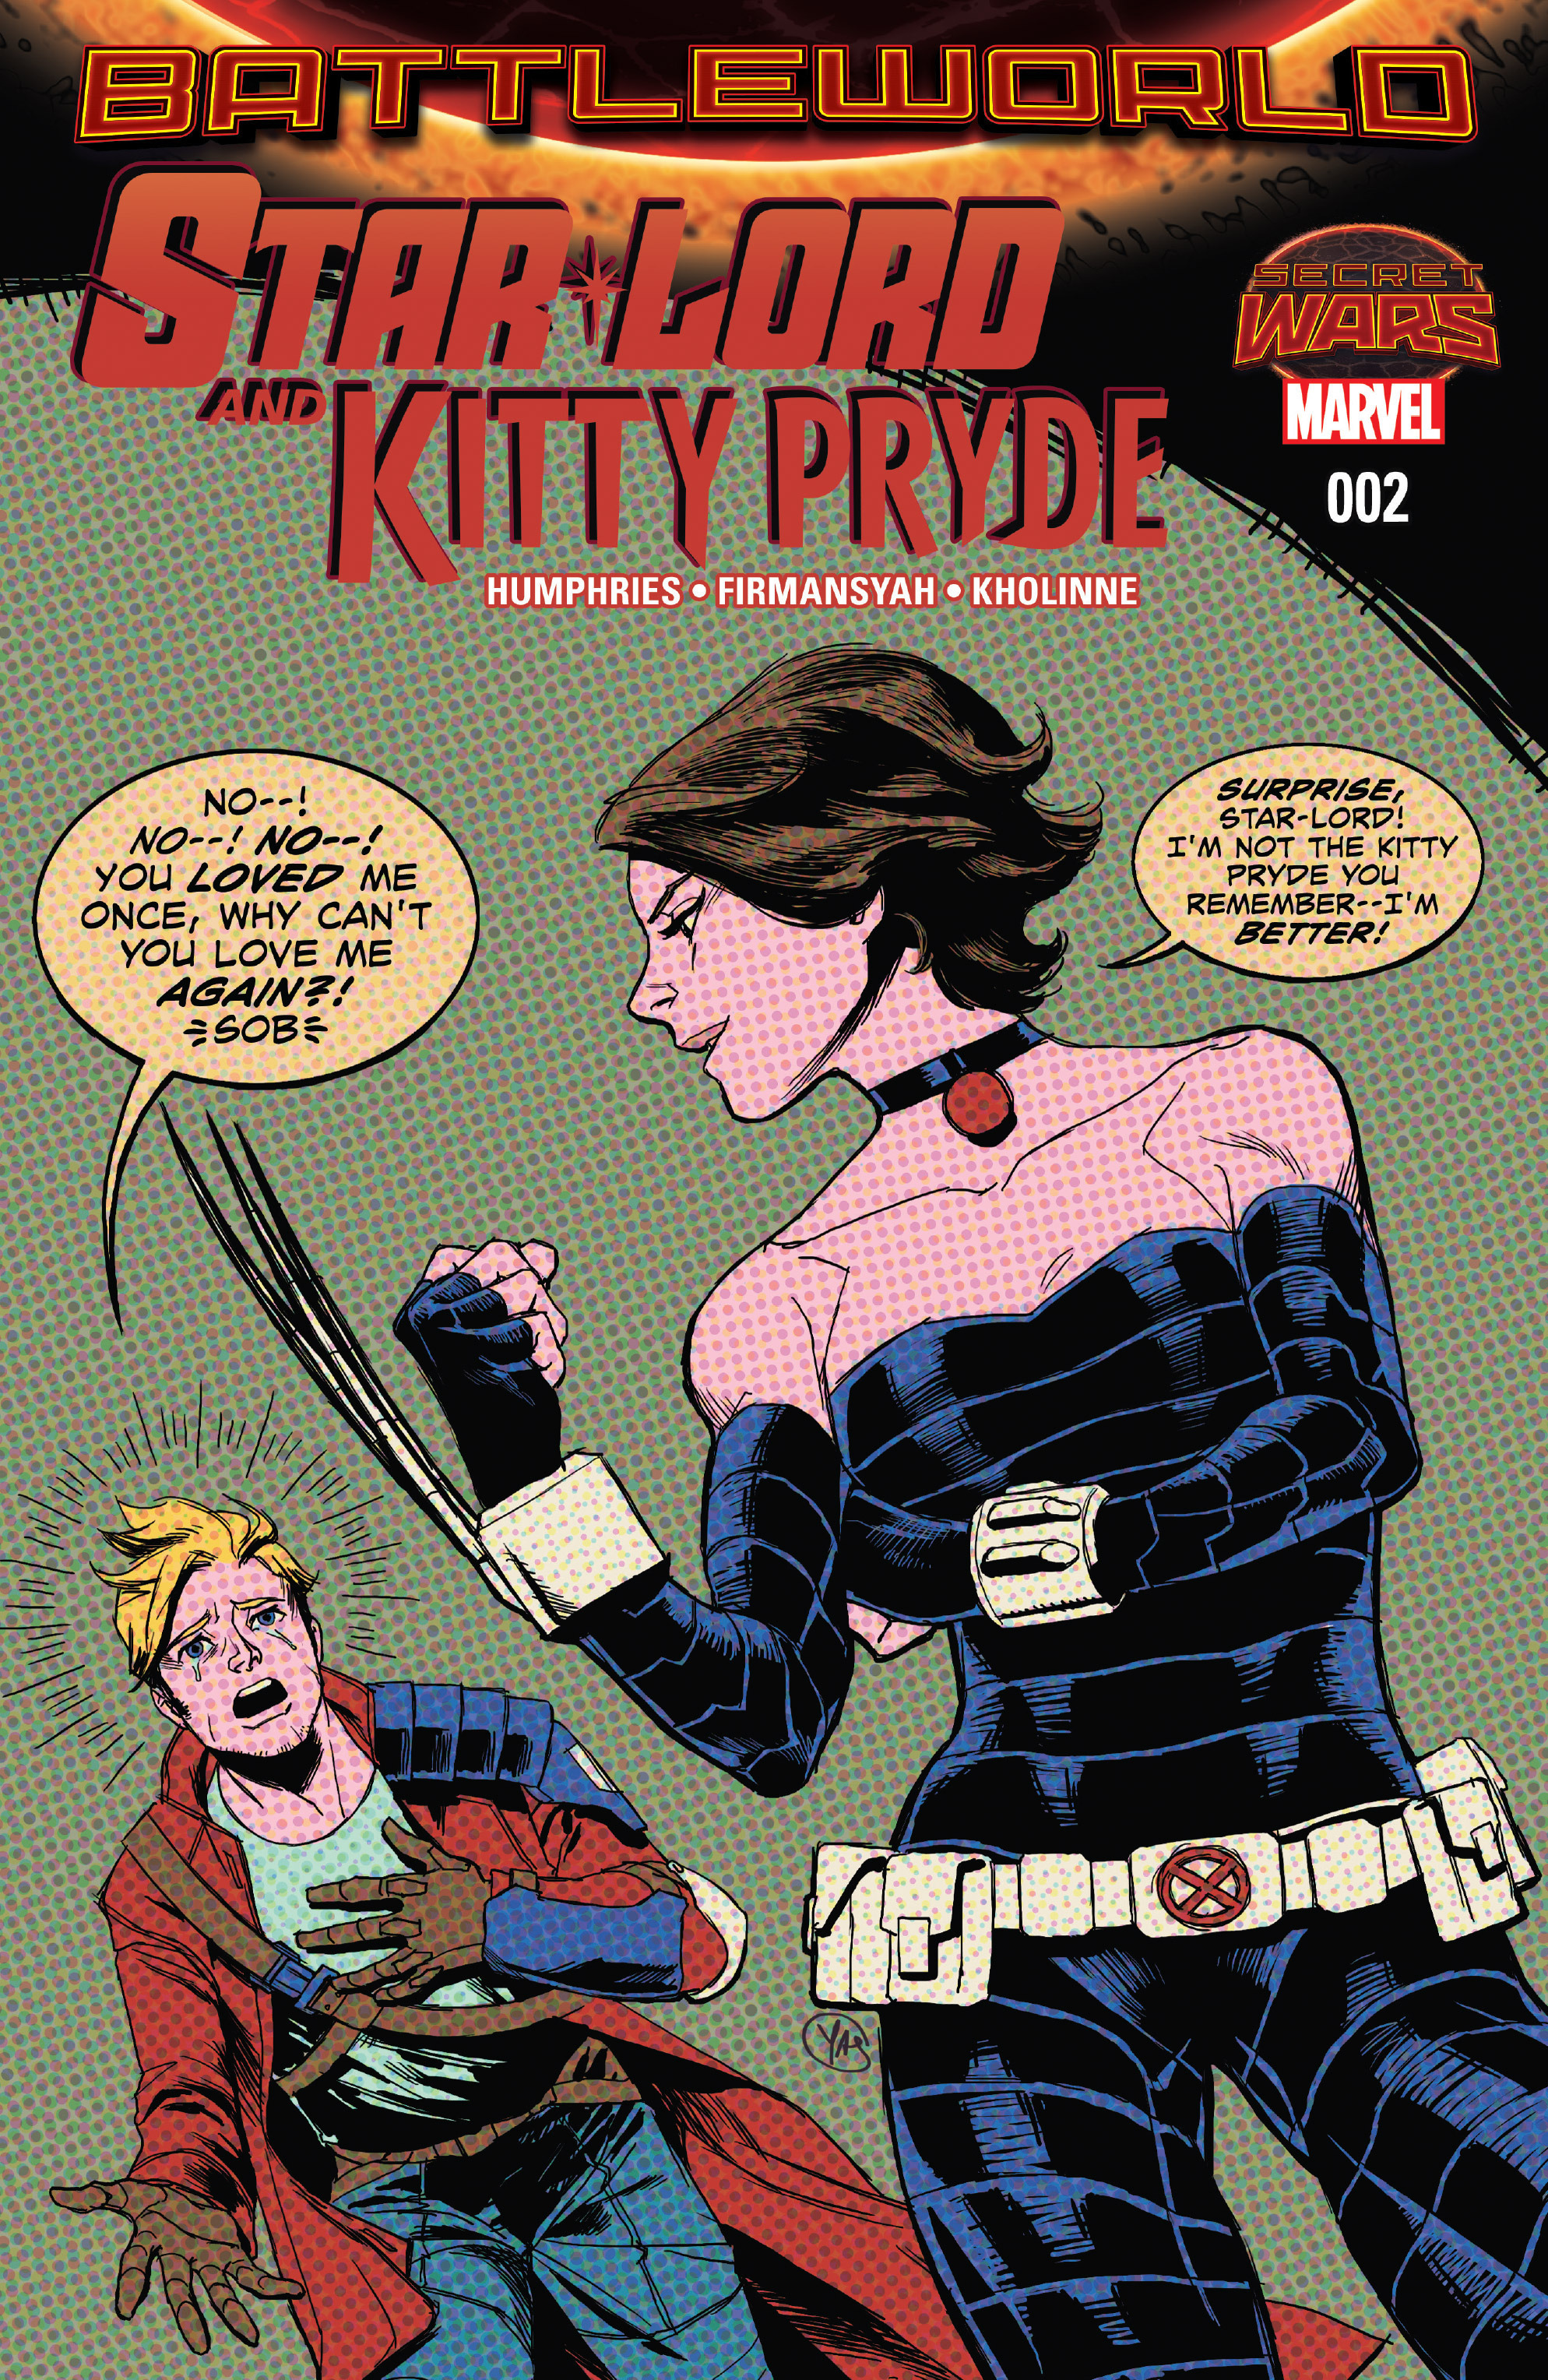 Kitty Pryde Shemale Porn - Star Lord And Kitty Pryde Issue 2 | Read Star Lord And Kitty Pryde Issue 2  comic online in high quality. Read Full Comic online for free - Read comics  online in